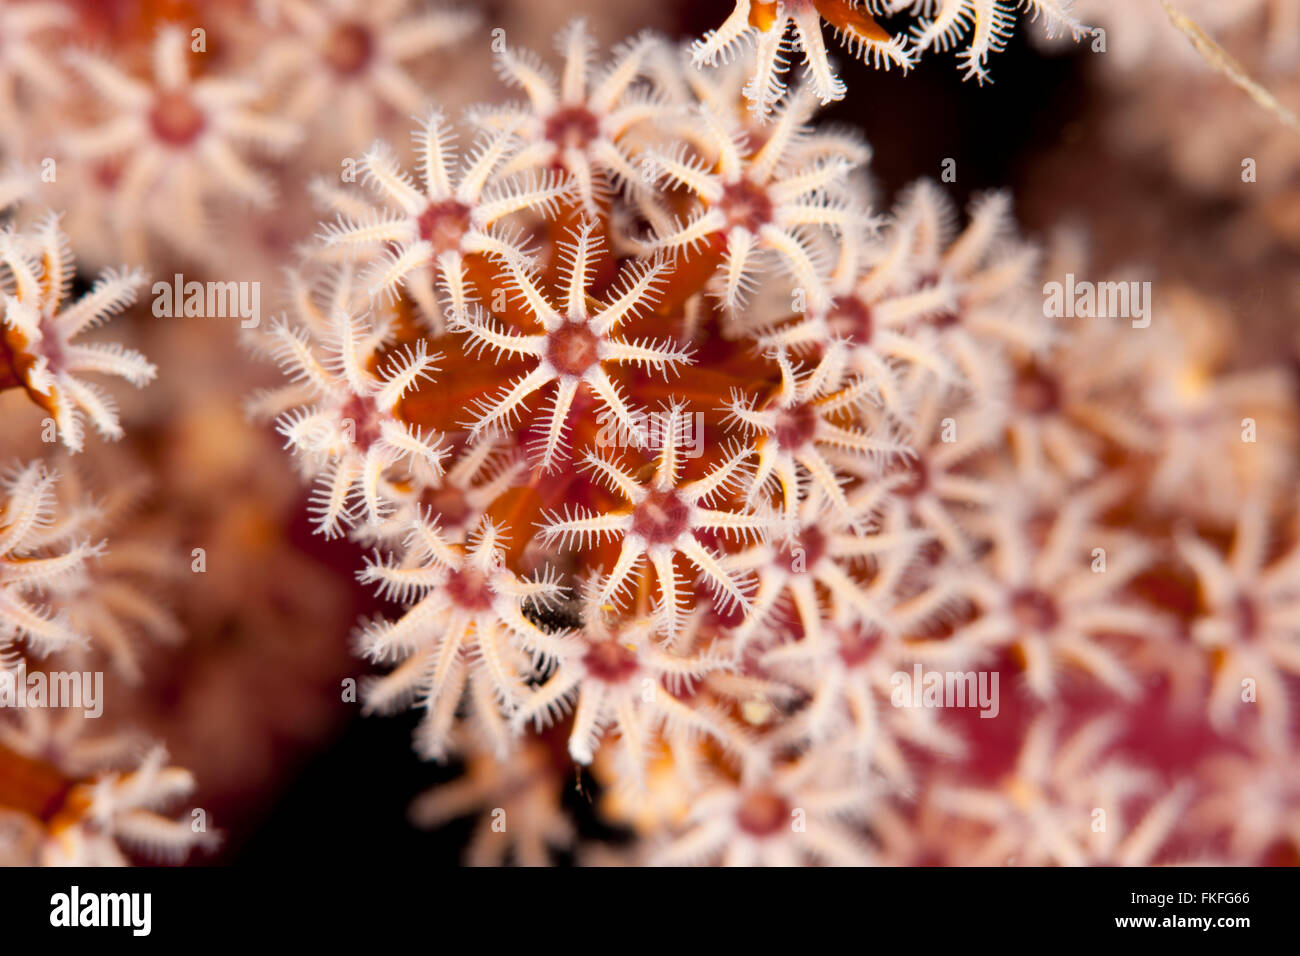 Octocoral o soft coral polyps in close-up. Foto Stock